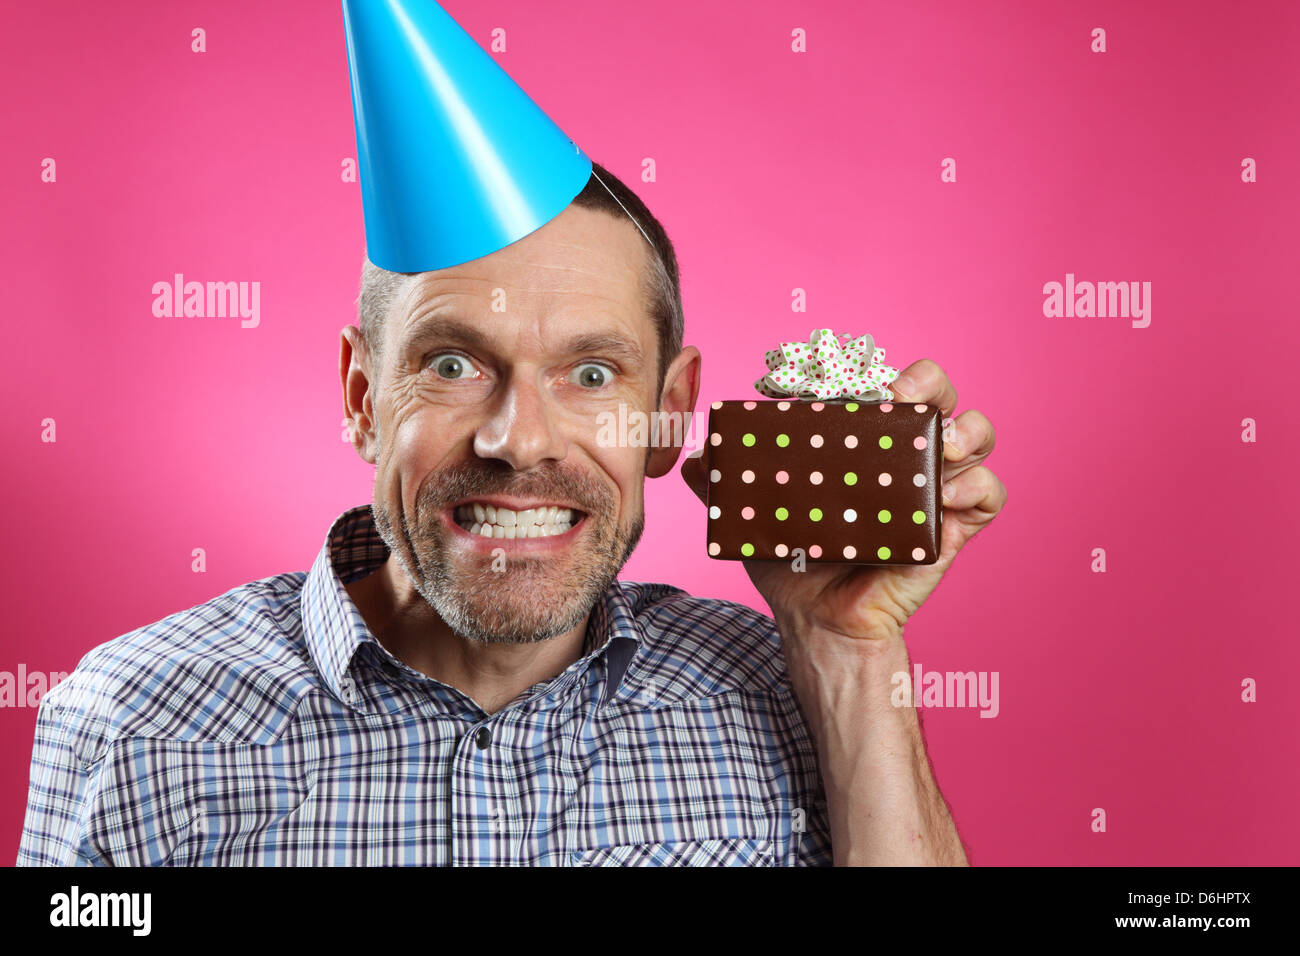 Man wearing a party hat with a big toothy smile and holding a gift. Stock Photo